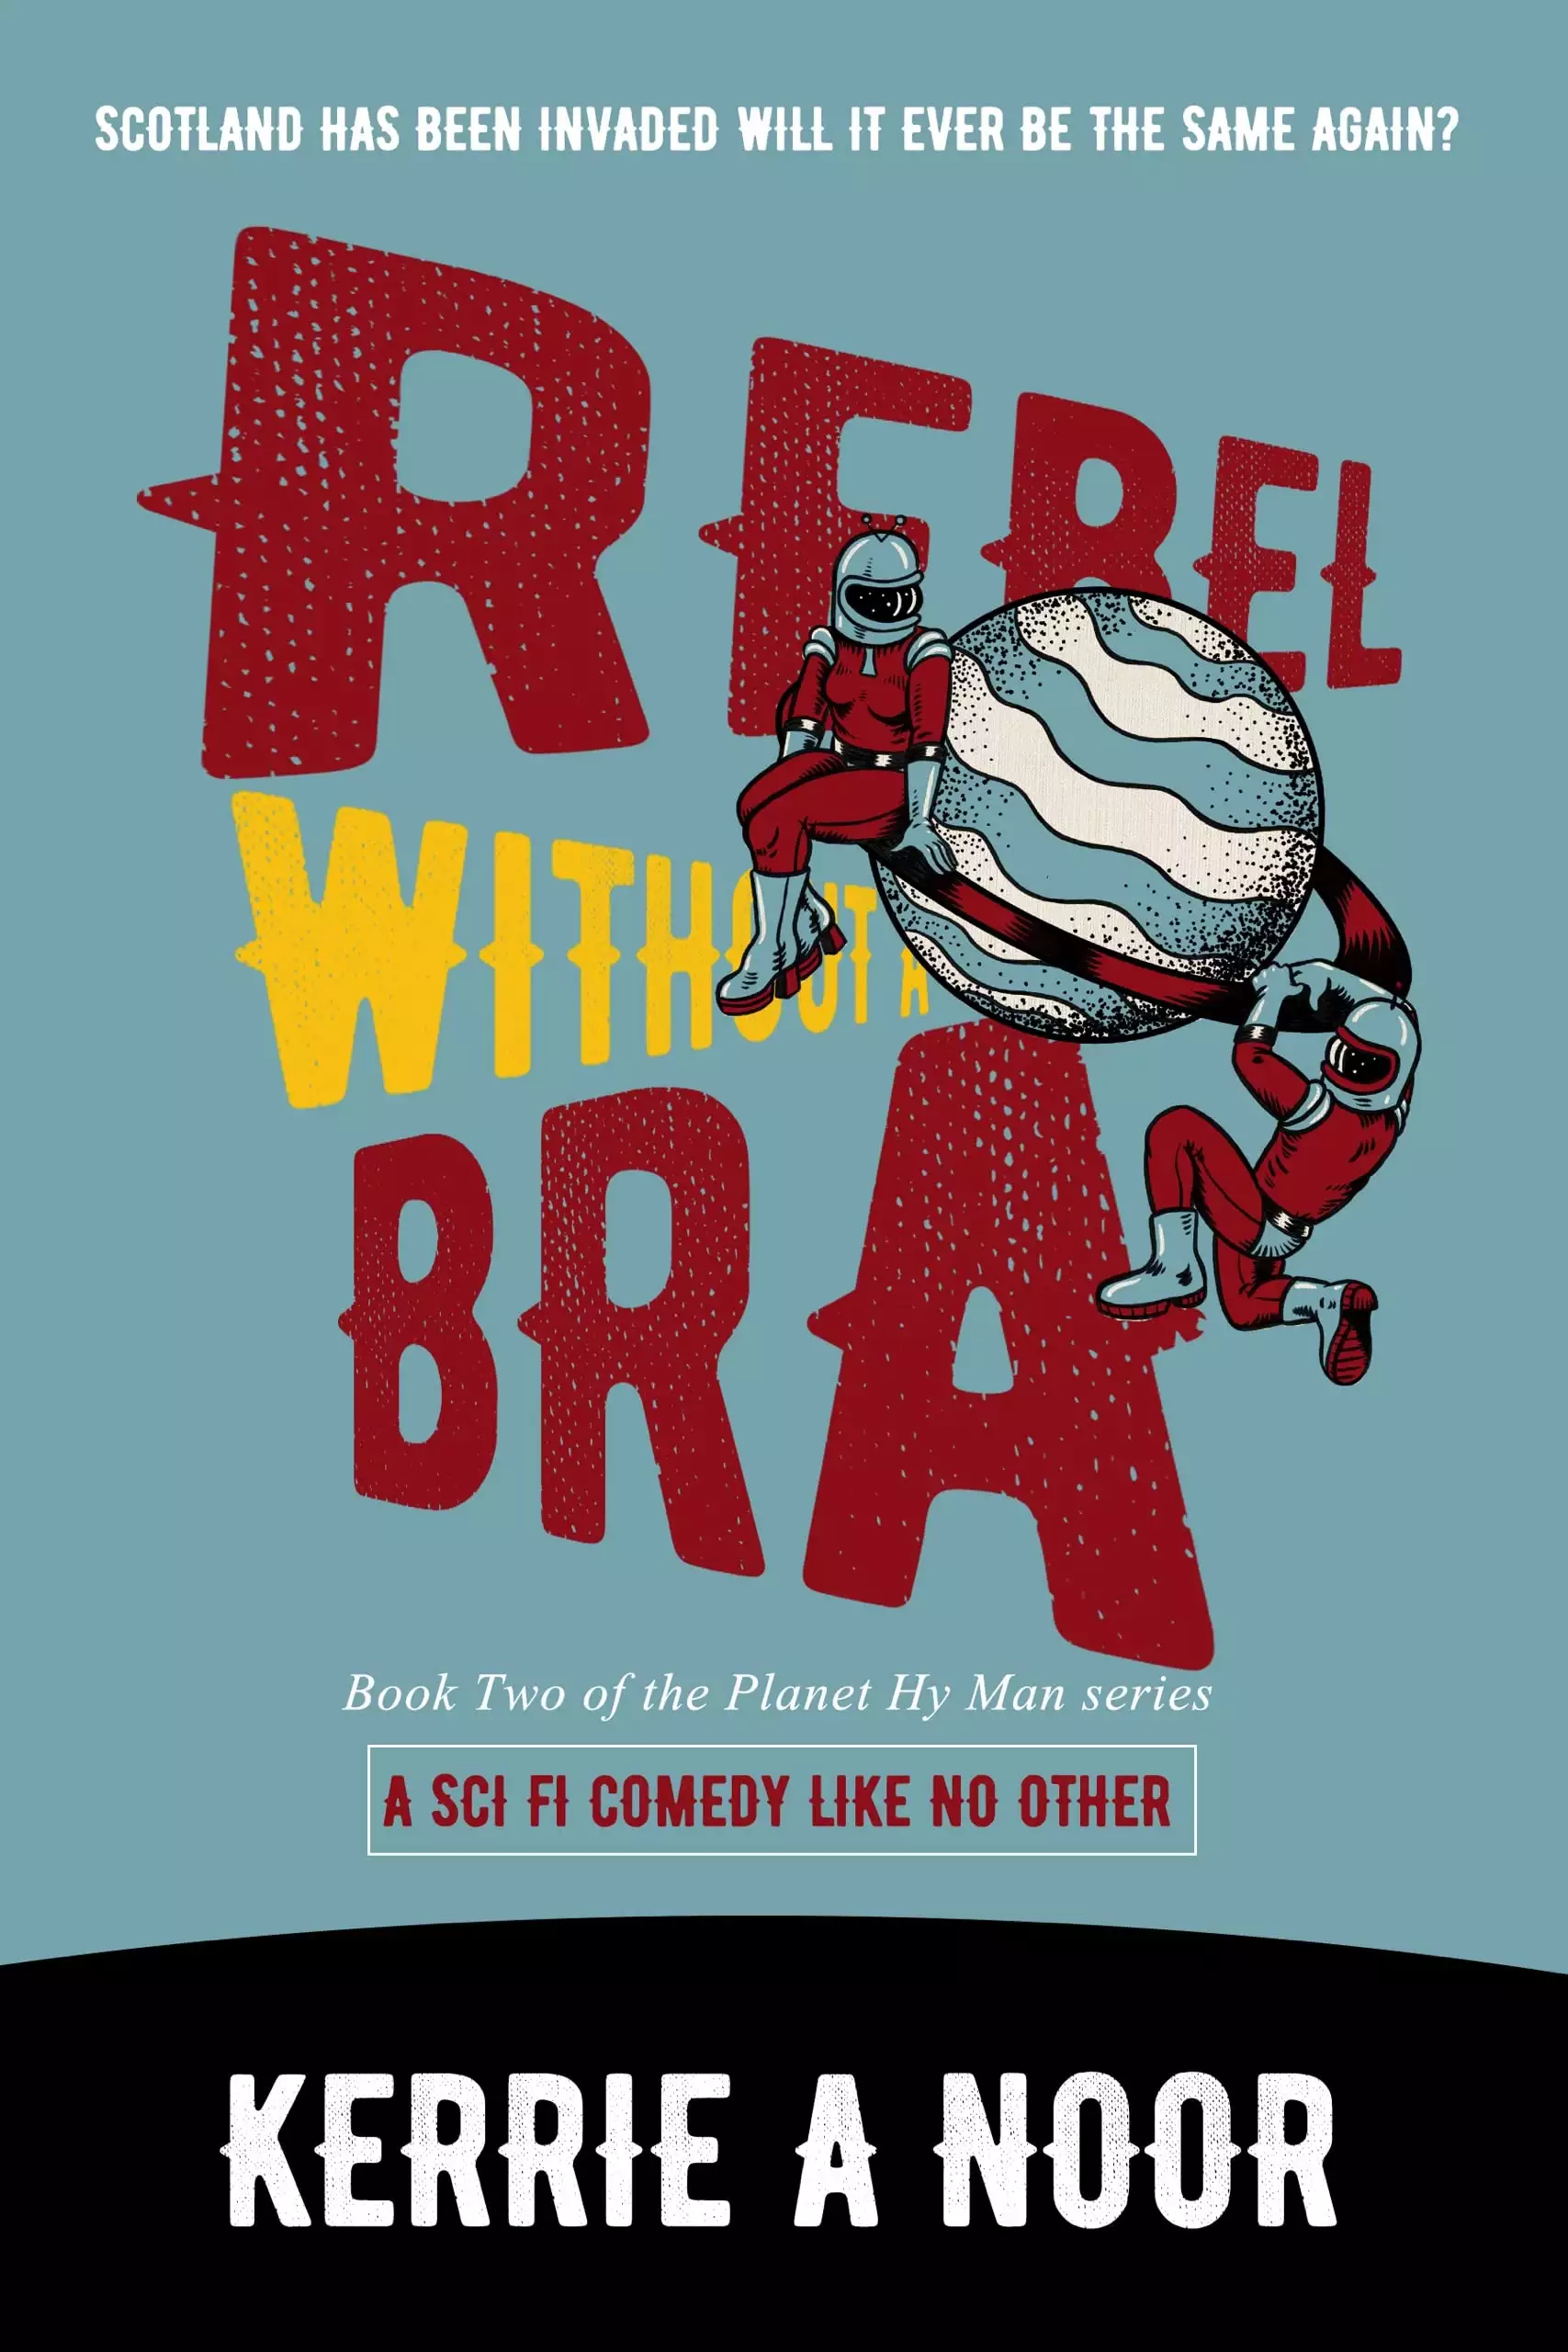 Rebel Without A Bra: A Sci Fi Comedy Where Women Wield The Whip